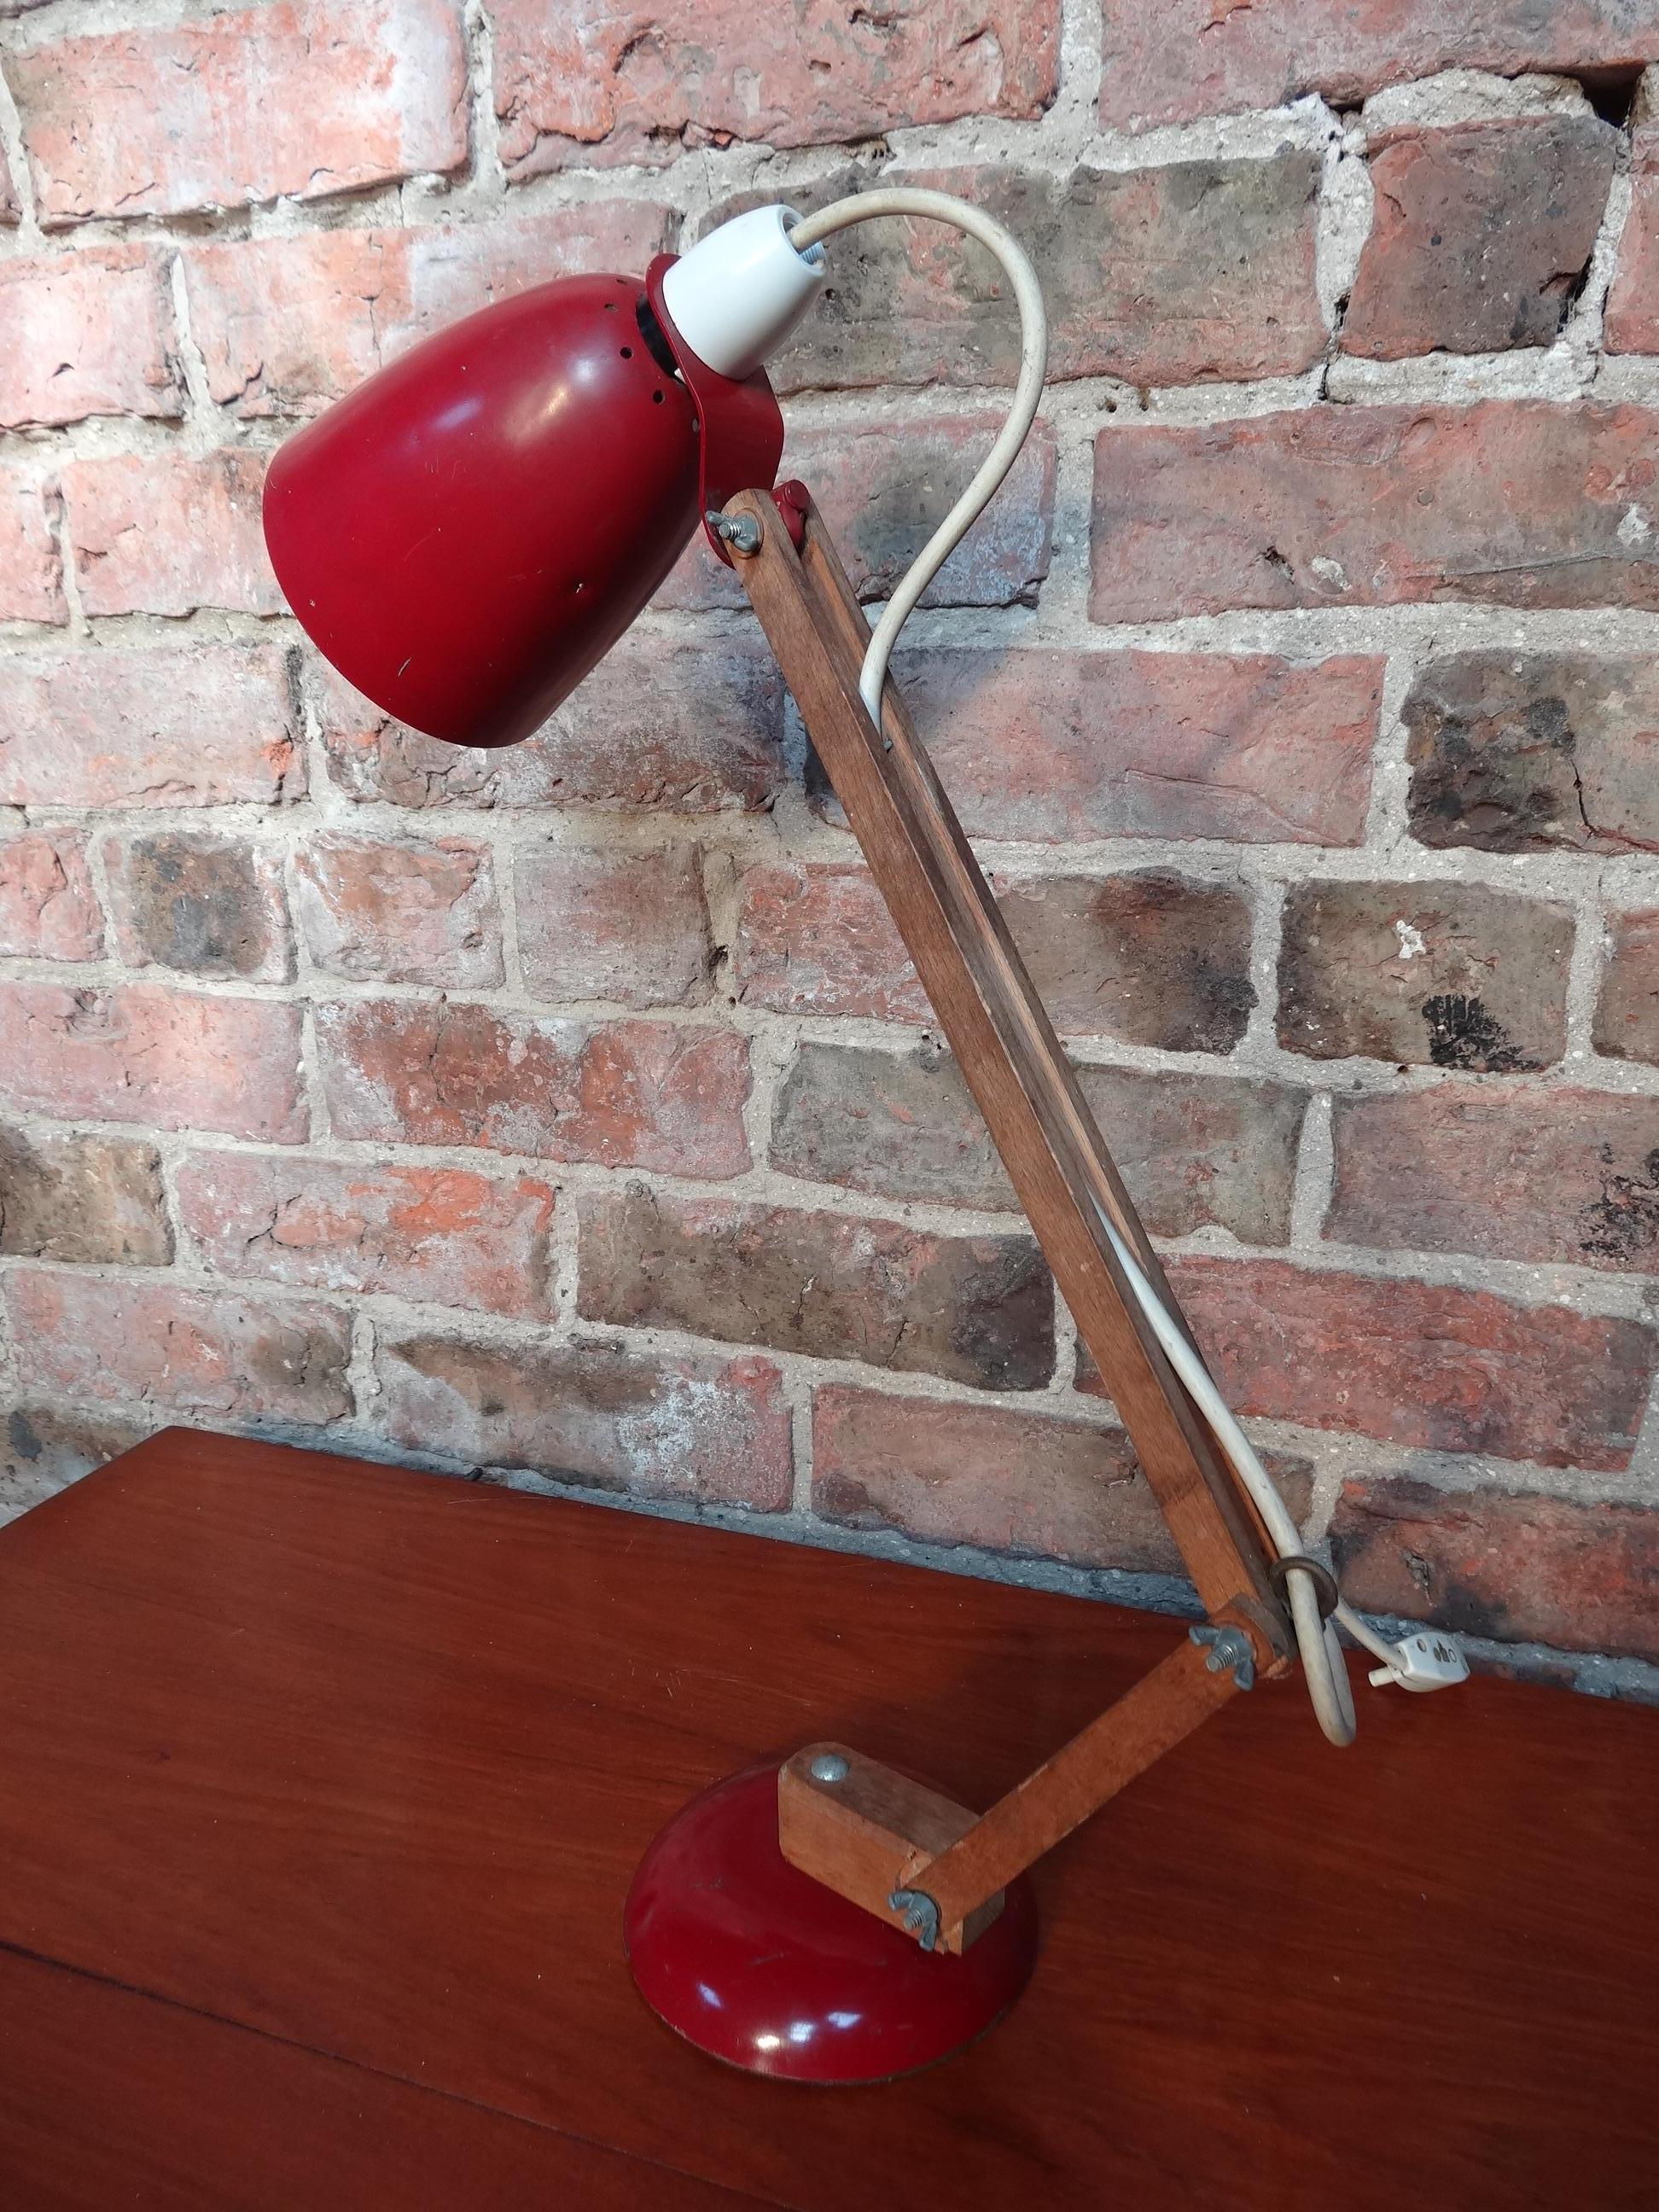 1950 retro wooden anglepoise lamp with red metal base and shade. 

Measures: Height: 50cm, depth: 35cm, width: 13cm.